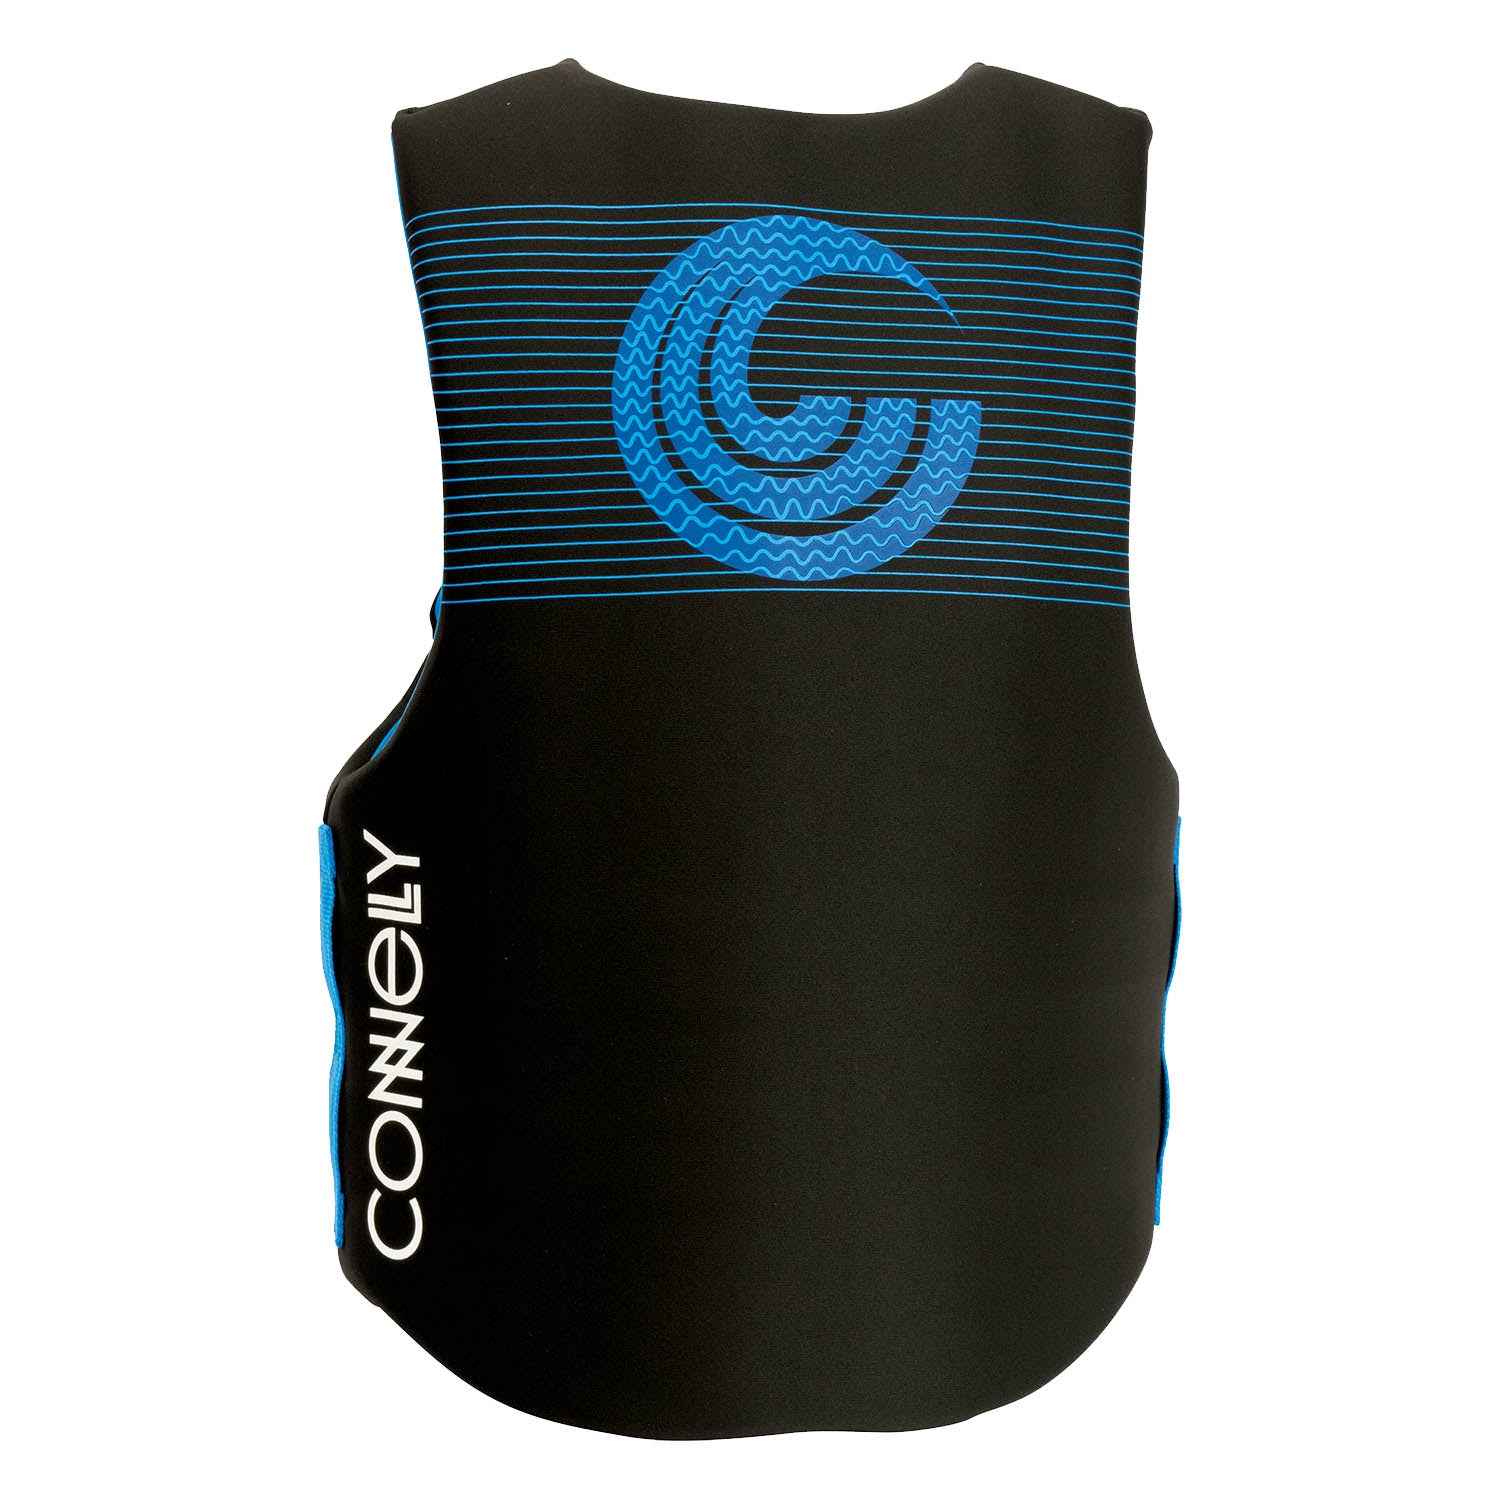 Connelly Promo Vest 2021